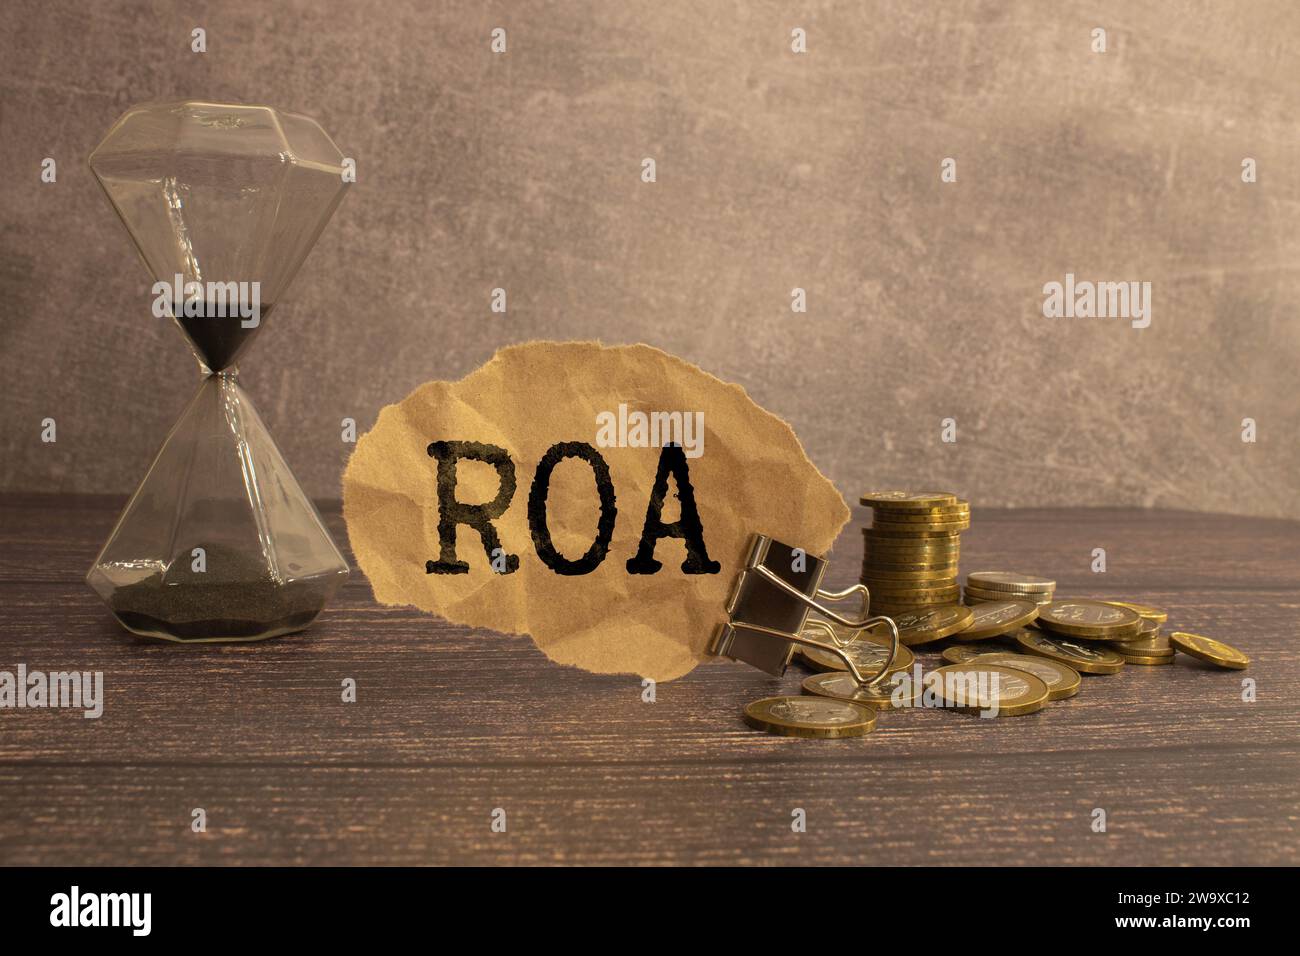 roa - text on wood cube block stack with coins, blue background, business concept. roa - short for Return On Assets. Stock Photo